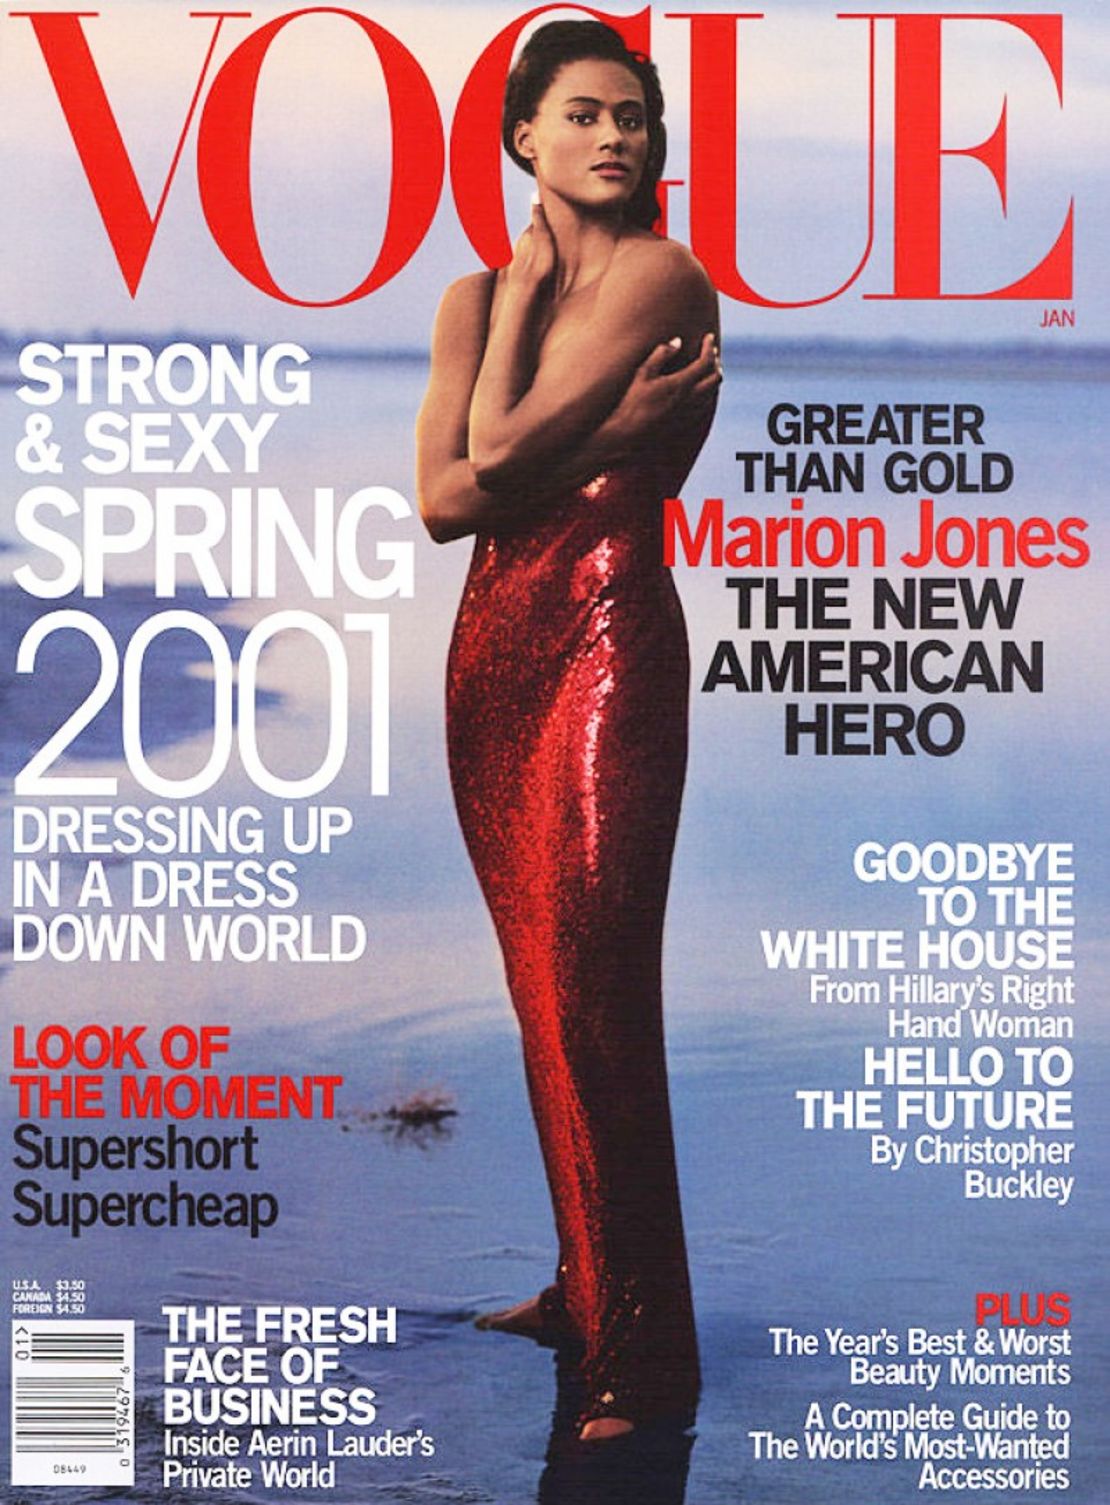 Vogue Book of Fashion Photography: The First Sixty Years